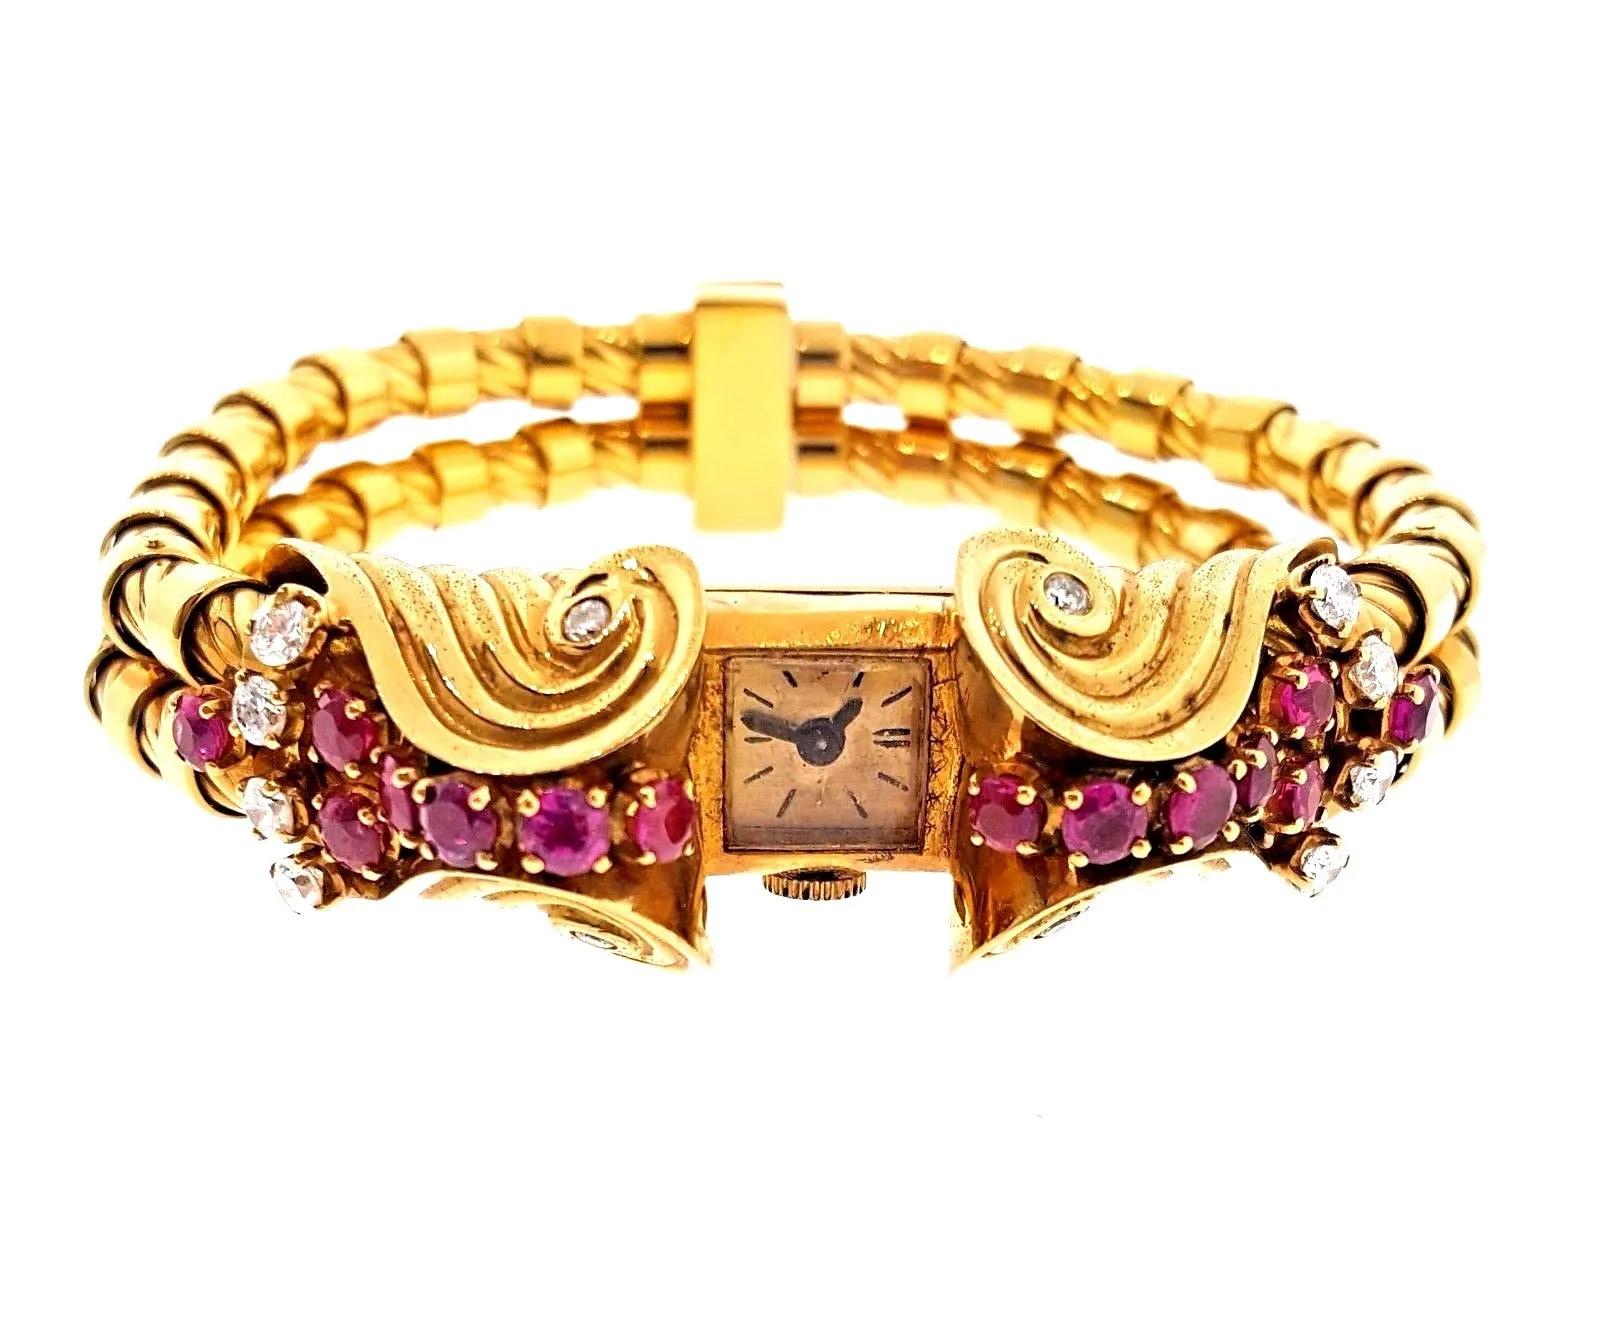 Vintage French Retro Ruby and Diamond Bracelet Watch in 18K Rose Gold

French Retro bracelet watch beautifully crafted in 18K Rose Gold. Decorating the case of the watch are 14 red rubies and 12 diamonds weighing approximately 3.00 carats. The